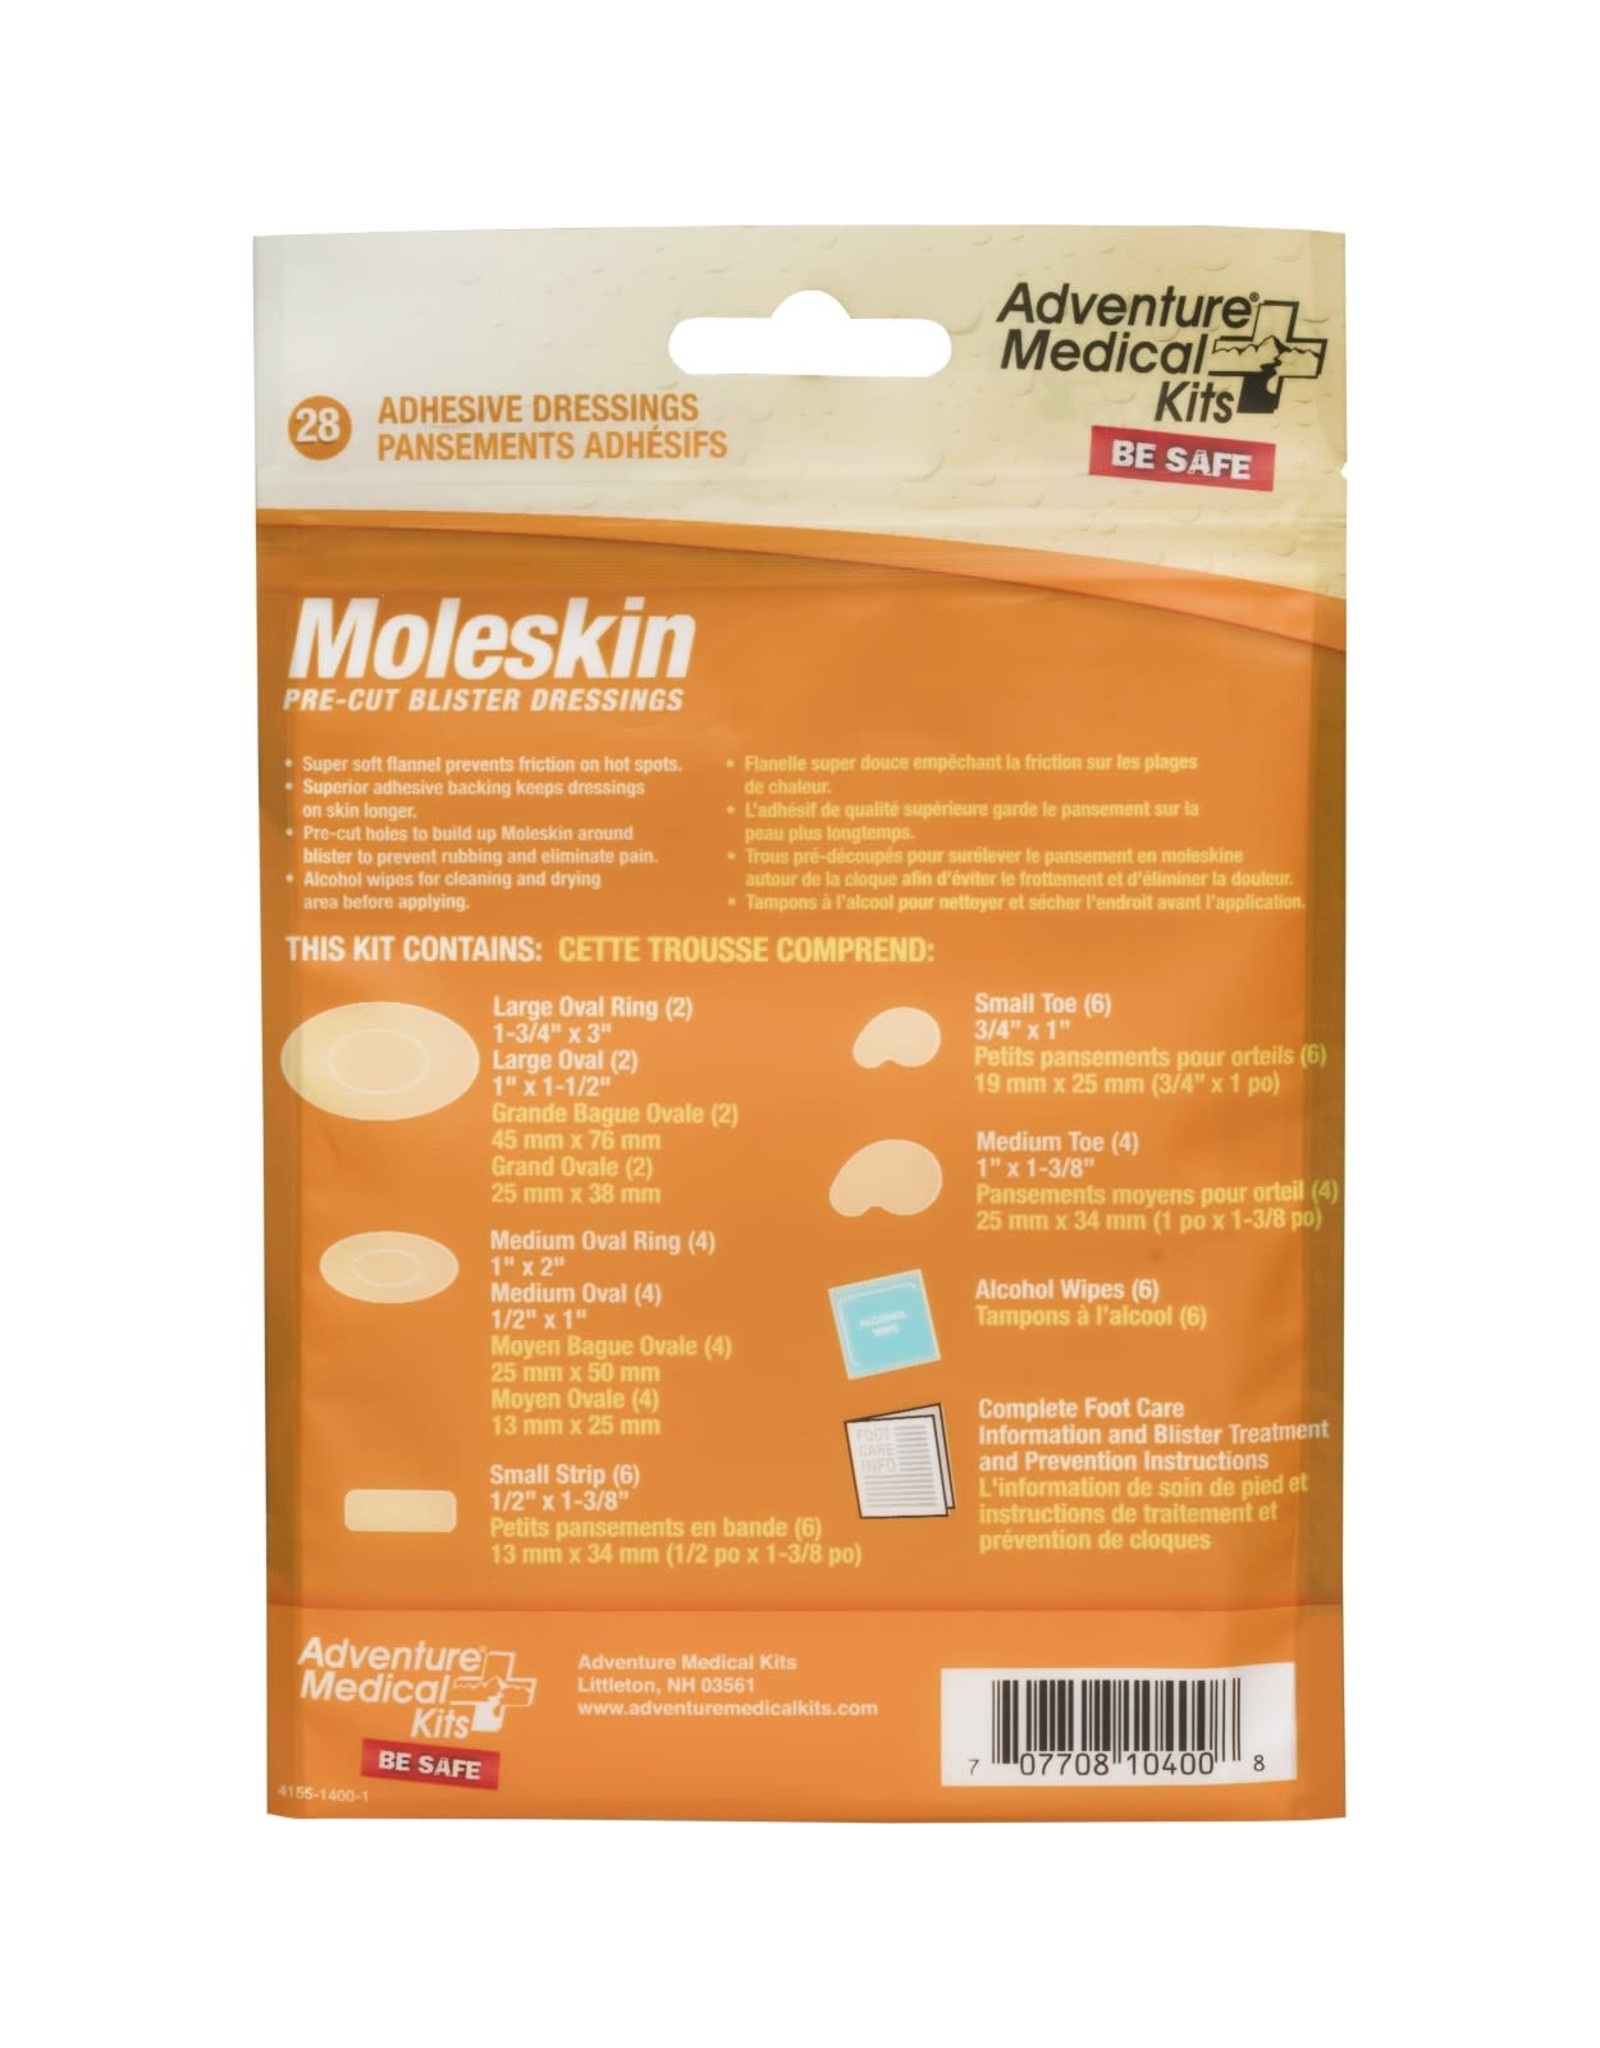 Adventure Medical Kits Adventure Medical Kits Moleskin Pre-cut and Shaped